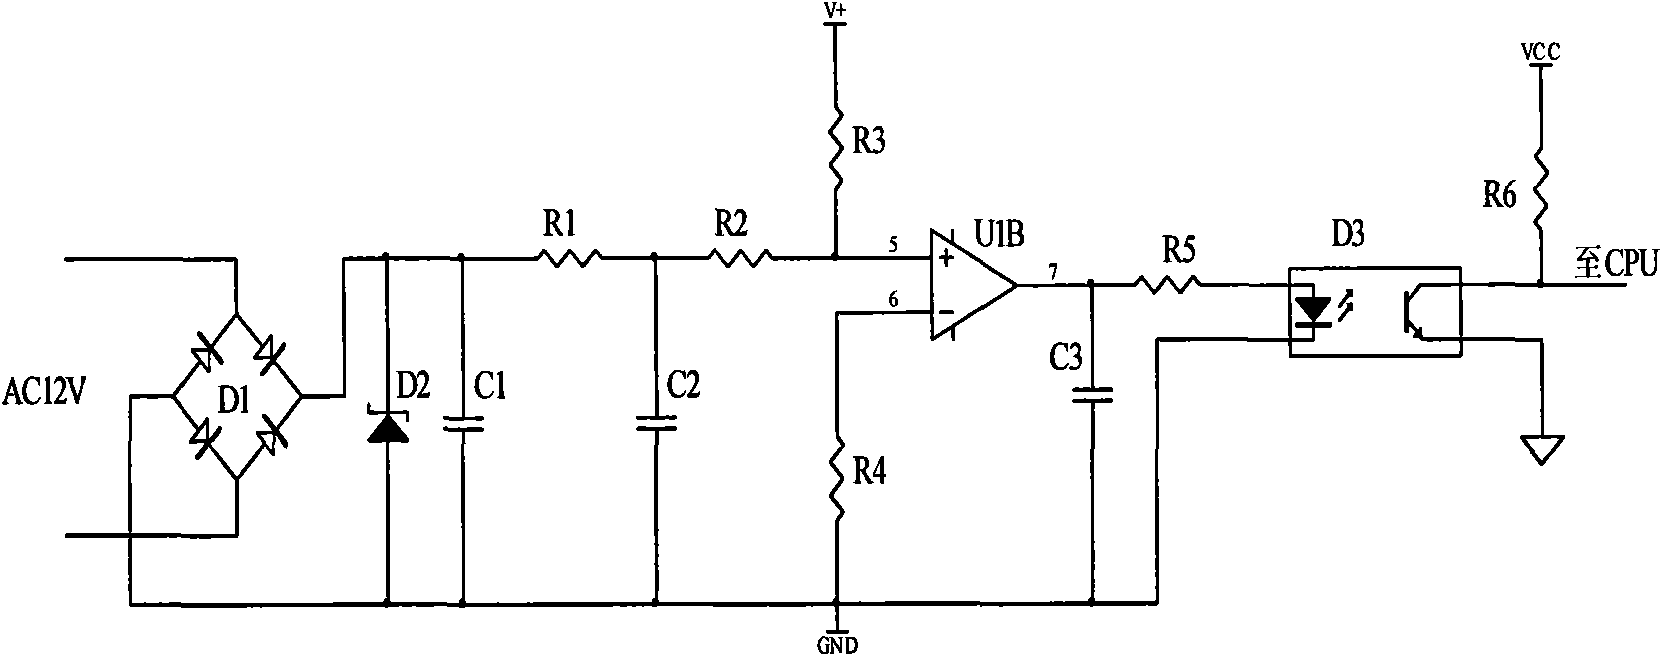 Speed regulating and inverting controller for generating set